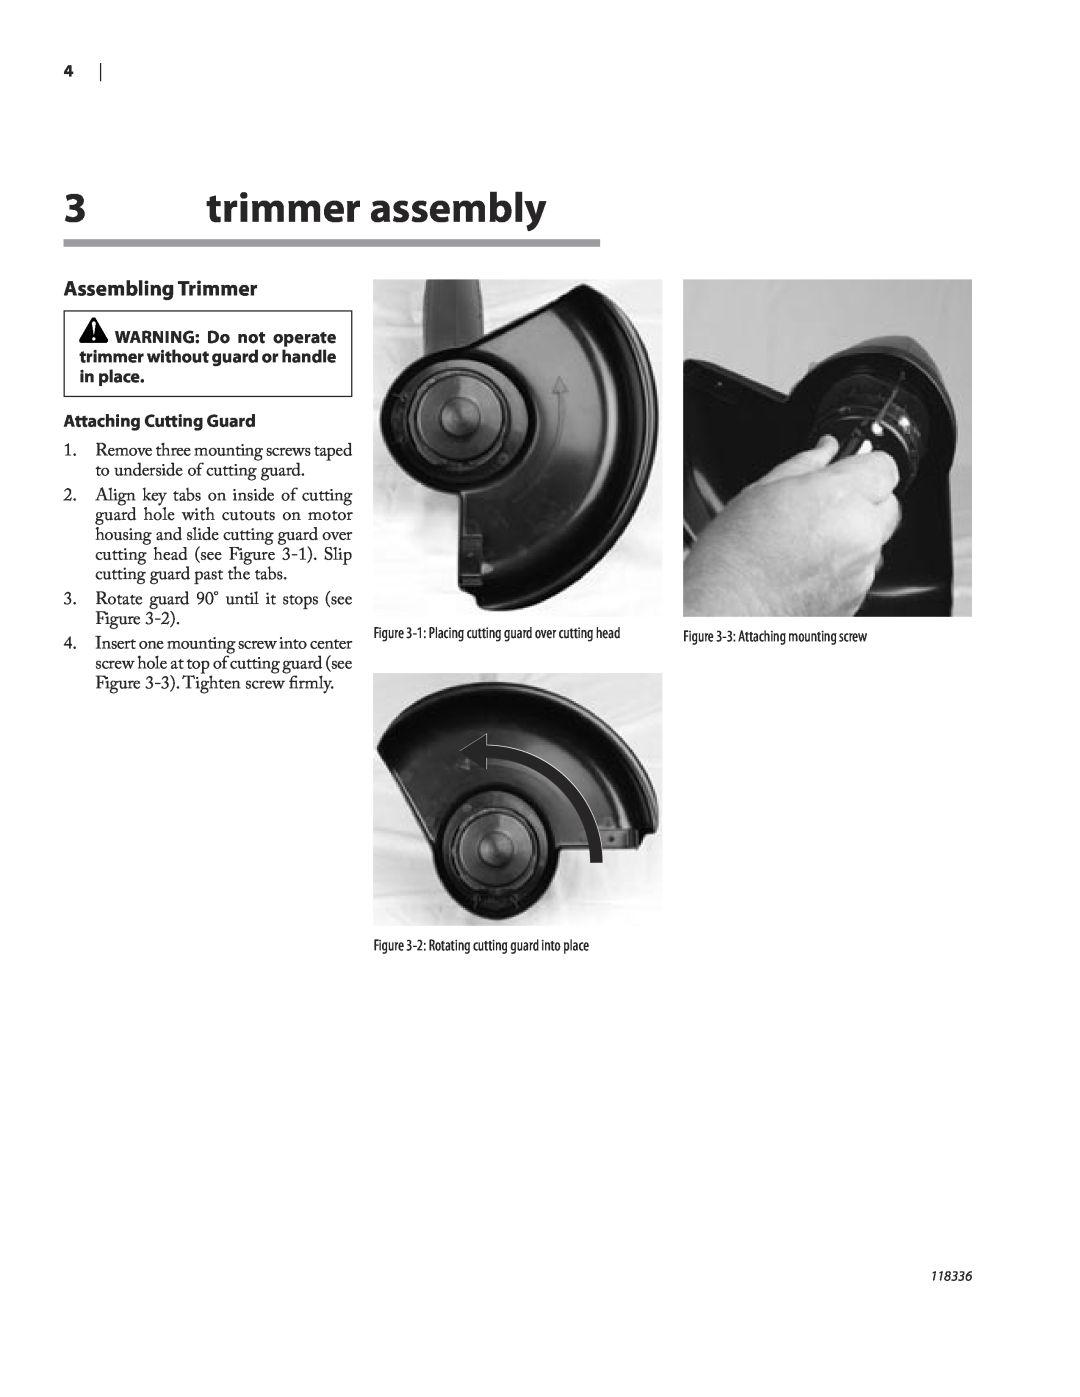 Remington ST3010A owner manual trimmer assembly, Assembling Trimmer, Attaching Cutting Guard 